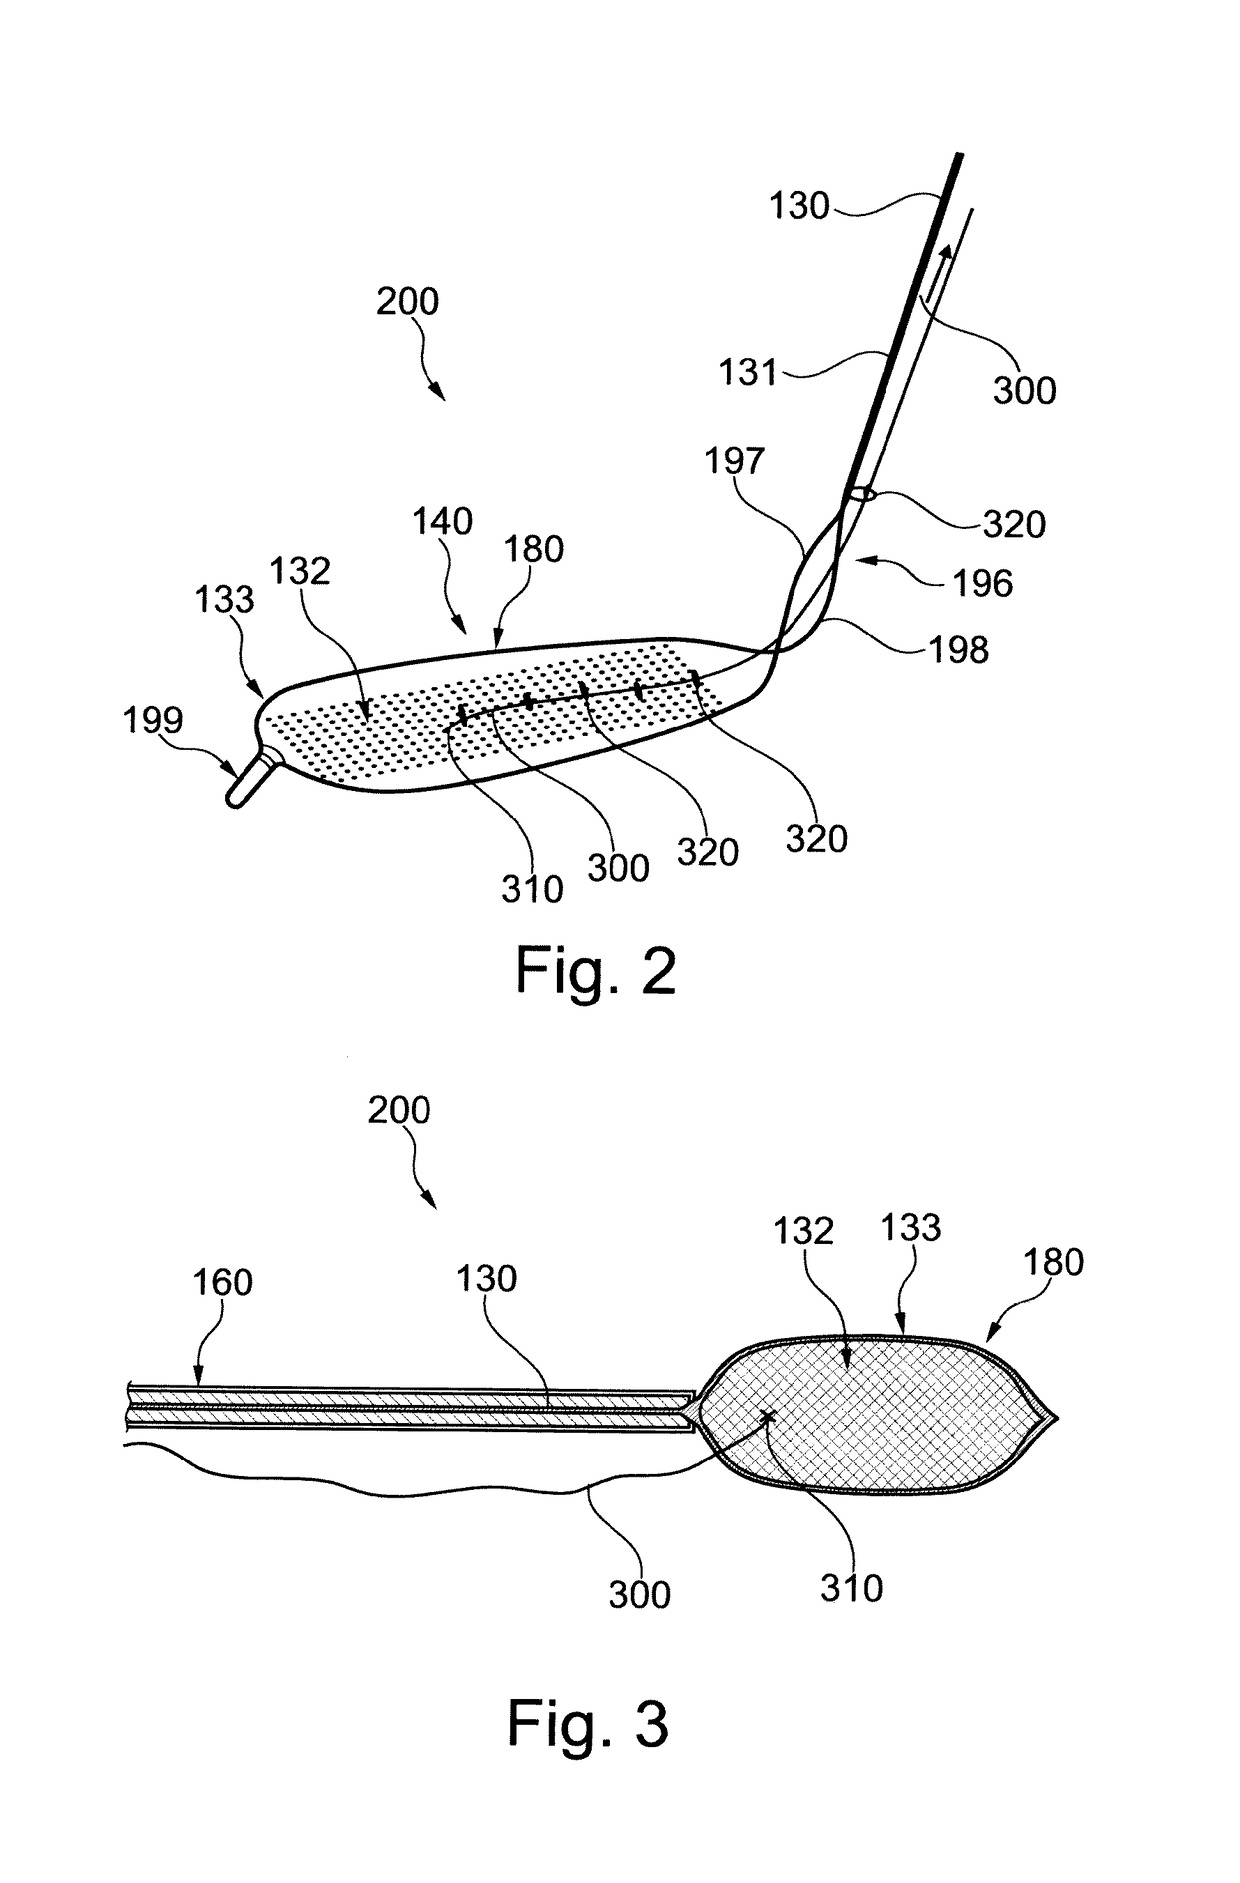 Embolic protection device and method